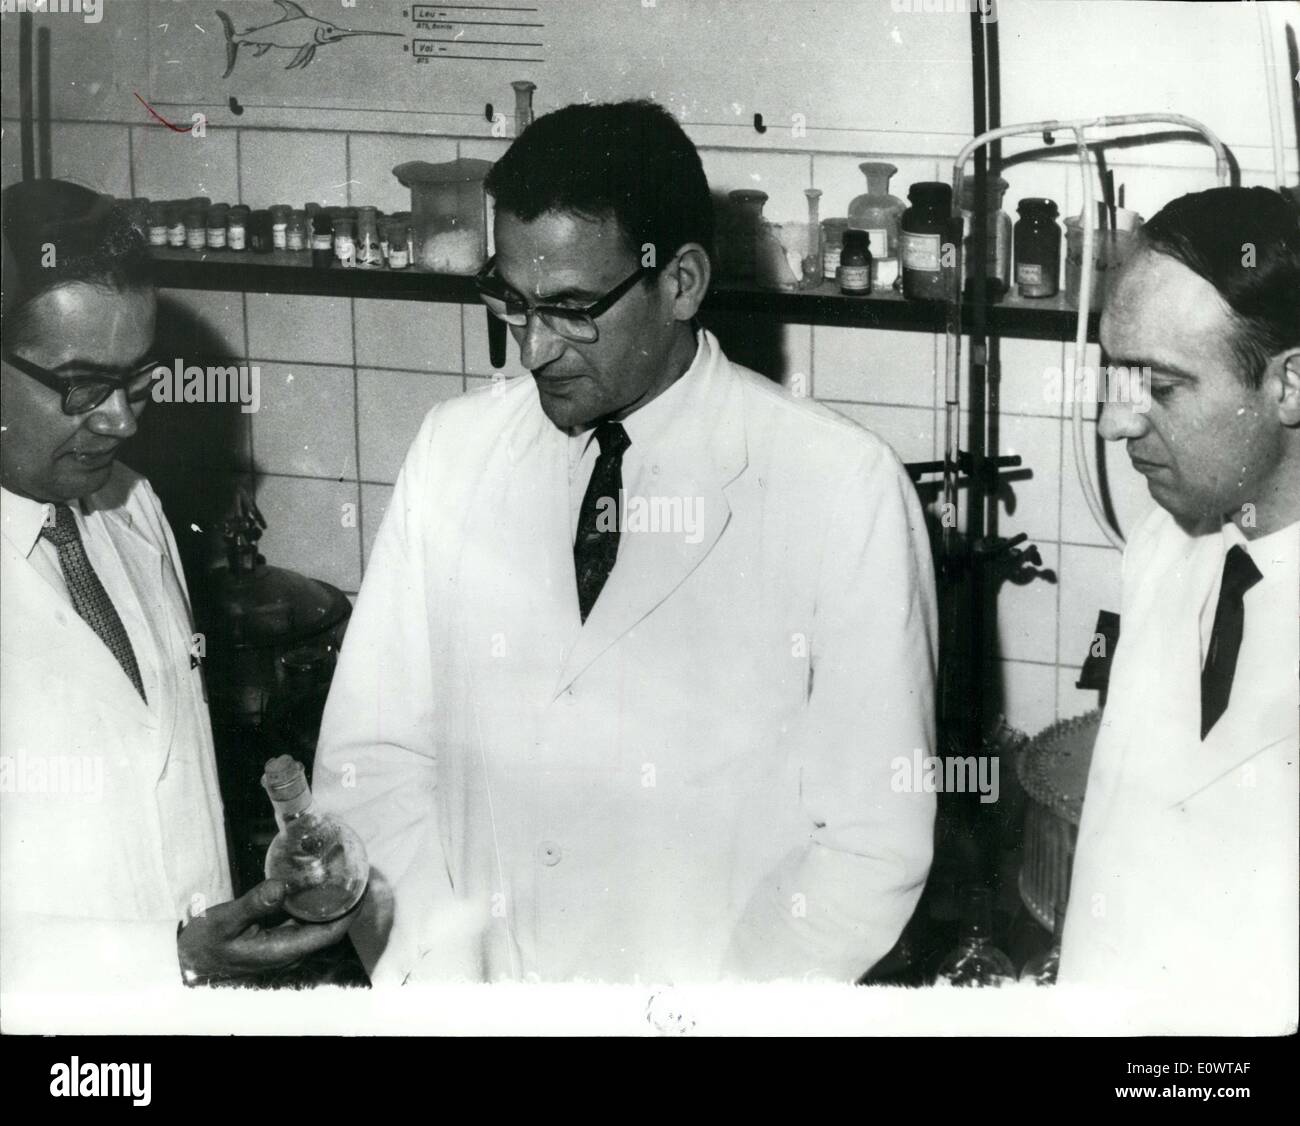 Feb. 14, 1964 - Achen Scholars produce synthetic Insulin: Until now, Insulin, which is required by diabetes sufferers, could only be obtained from the pancreas of animals, but now, after eight years of research scientists of the Technical High School at AACHEN in Germany have achieved a breakthrough by developing a synthetic type of Insulin, thus putting them ahead of scientists of other natiions includig America who have been working on similar projects. Photo shows The leader of the team, Dr.Helmut Zahn (Center) with two of his collaborators, Dr Stock Photo